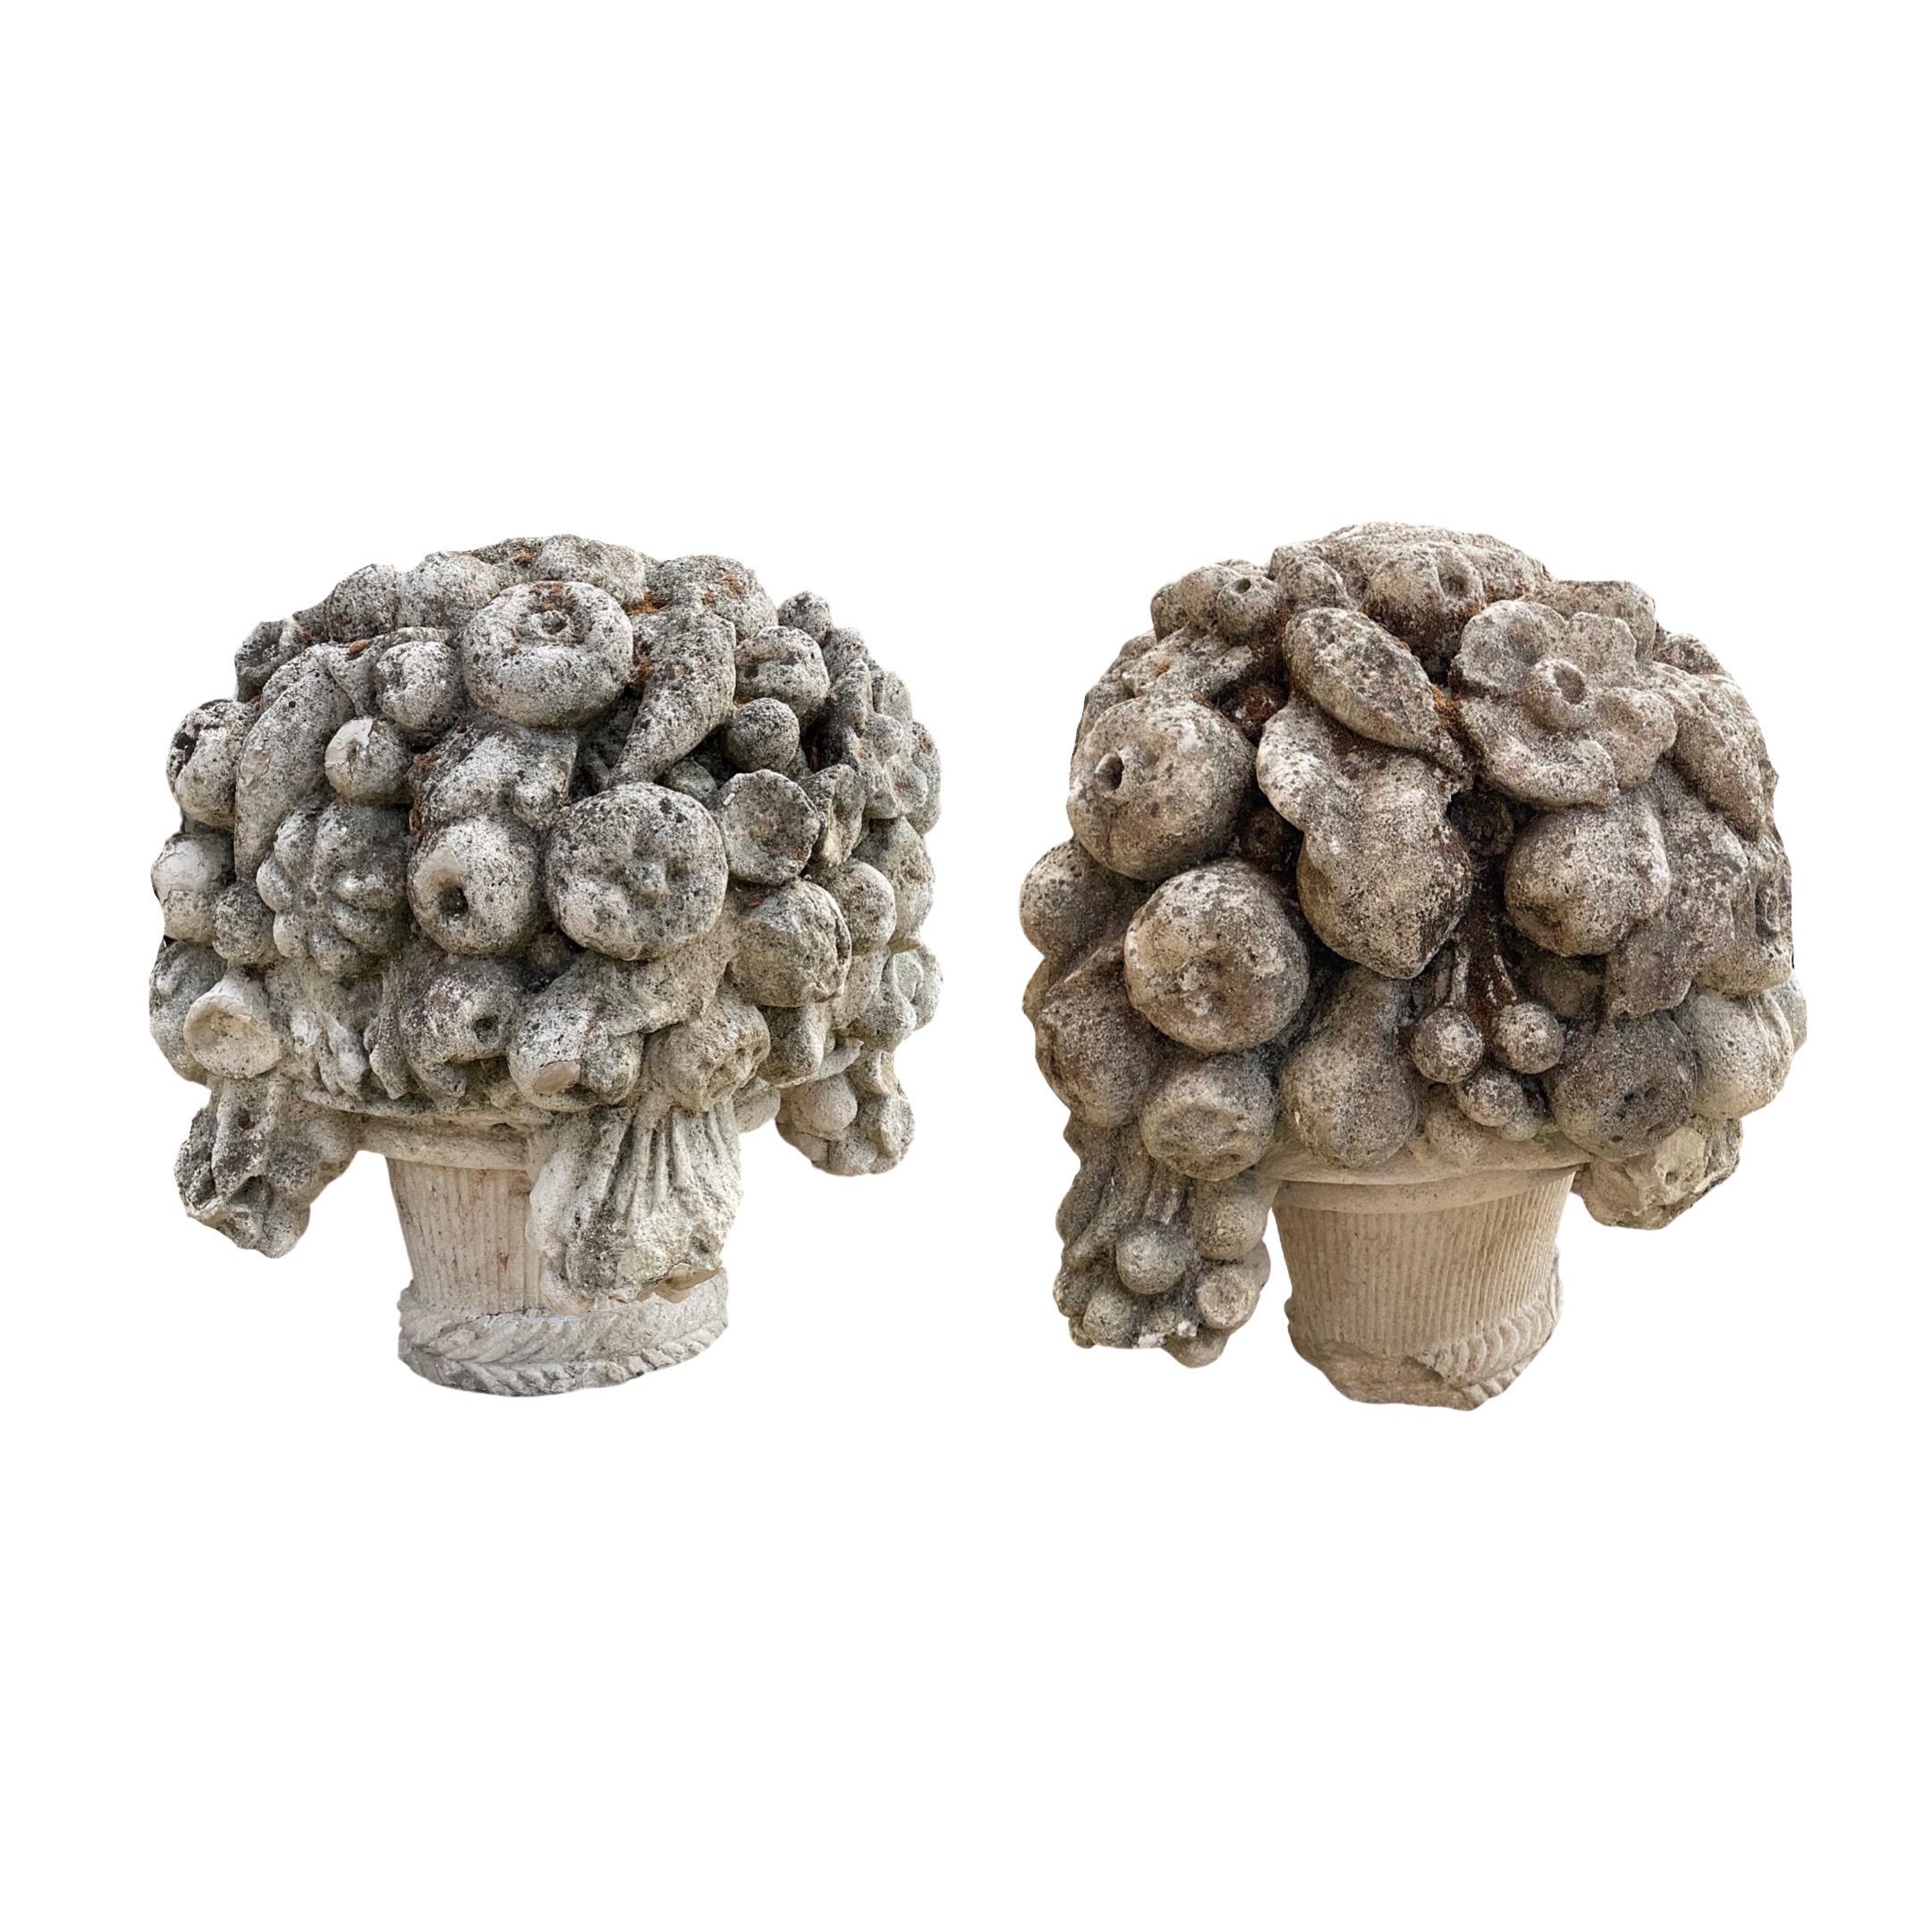 This unique pair of exquisite French limestone sculptures dates back to the 1850s. Carefully crafted from limestone, each sculpture features a beautiful bouquet of carved flowers. Imported from France, these sculptures are sure to complement your